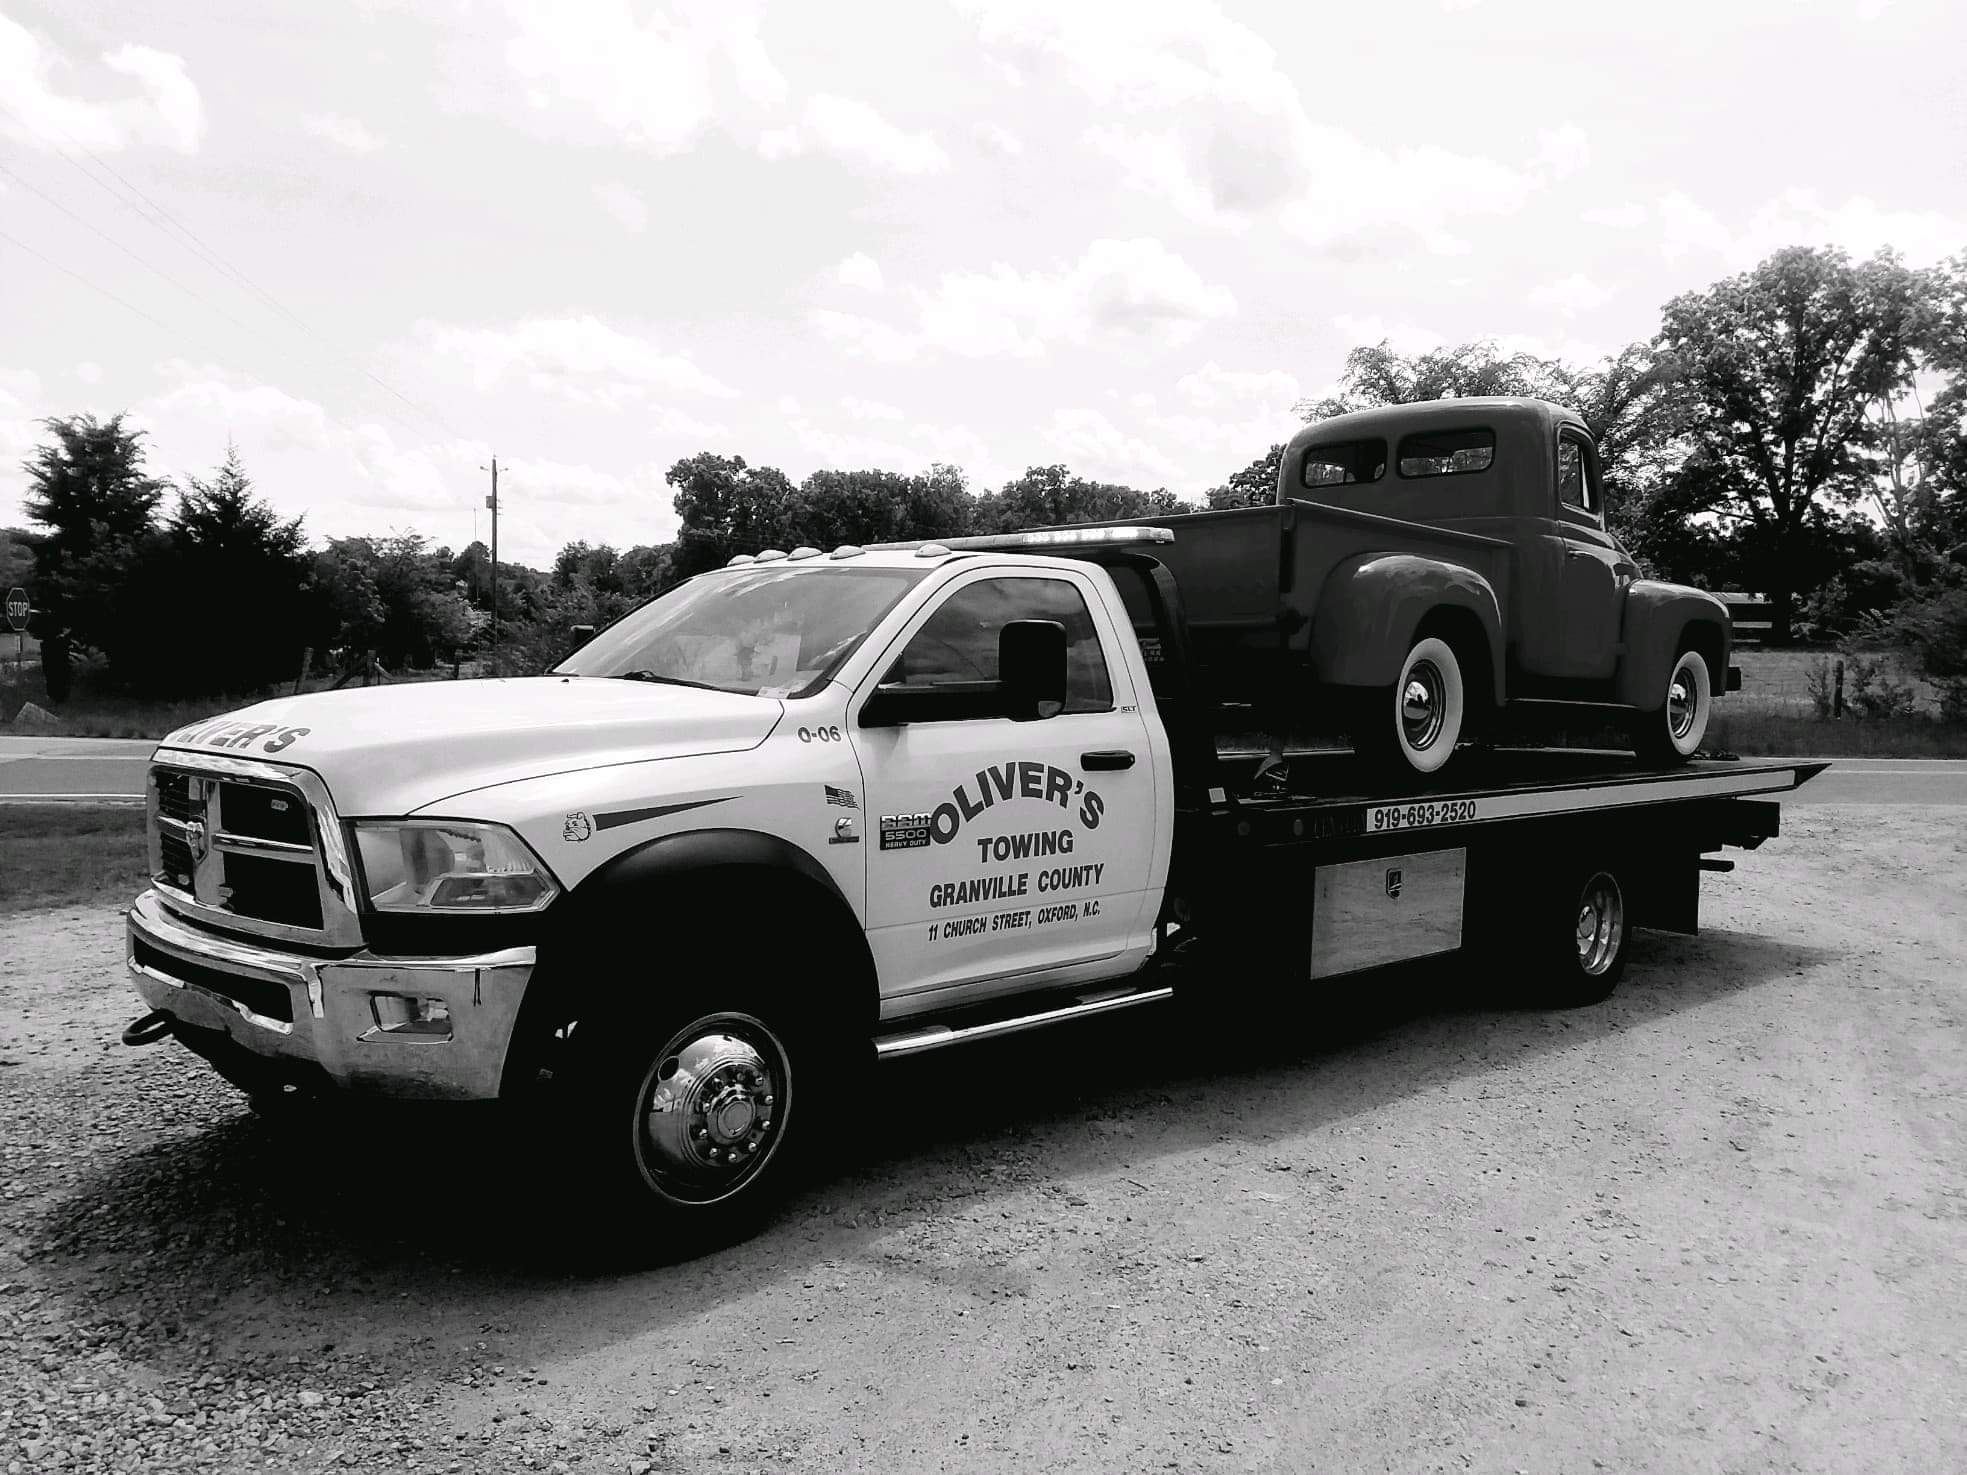 Oliver's towing, LLC